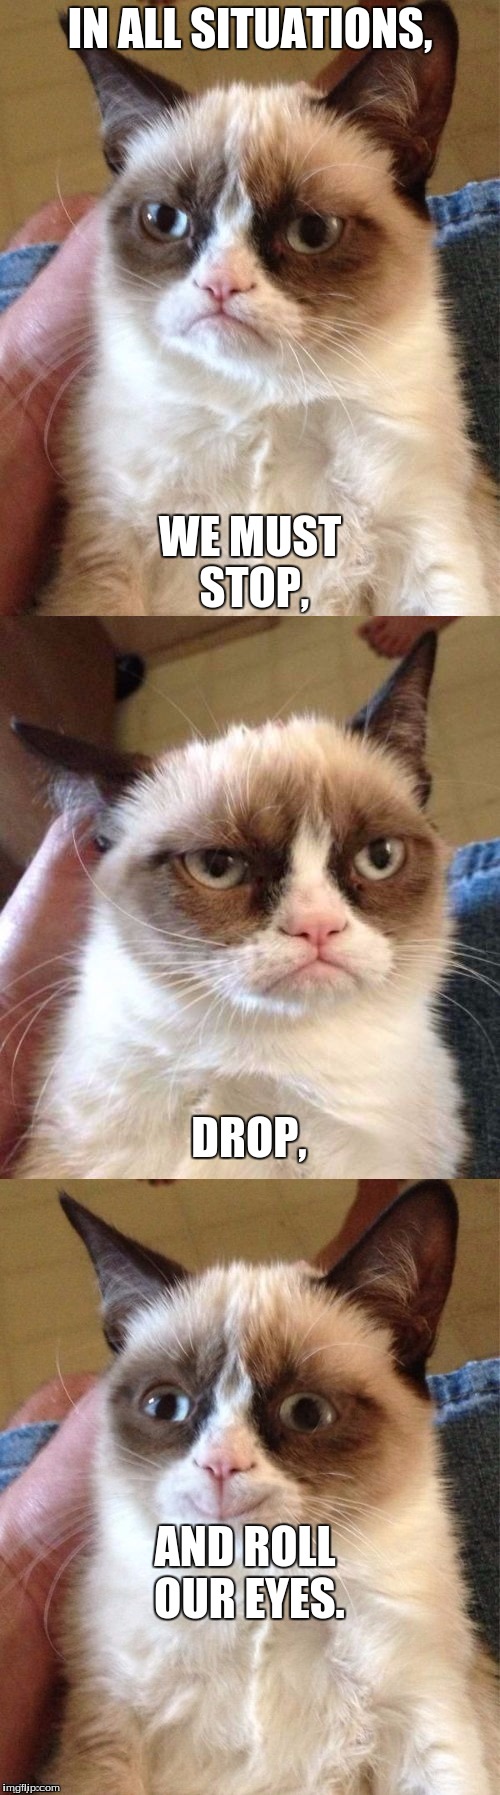 Bad Pun Grumpy Cat | IN ALL SITUATIONS, WE MUST STOP, DROP, AND ROLL OUR EYES. | image tagged in bad pun grumpy cat | made w/ Imgflip meme maker